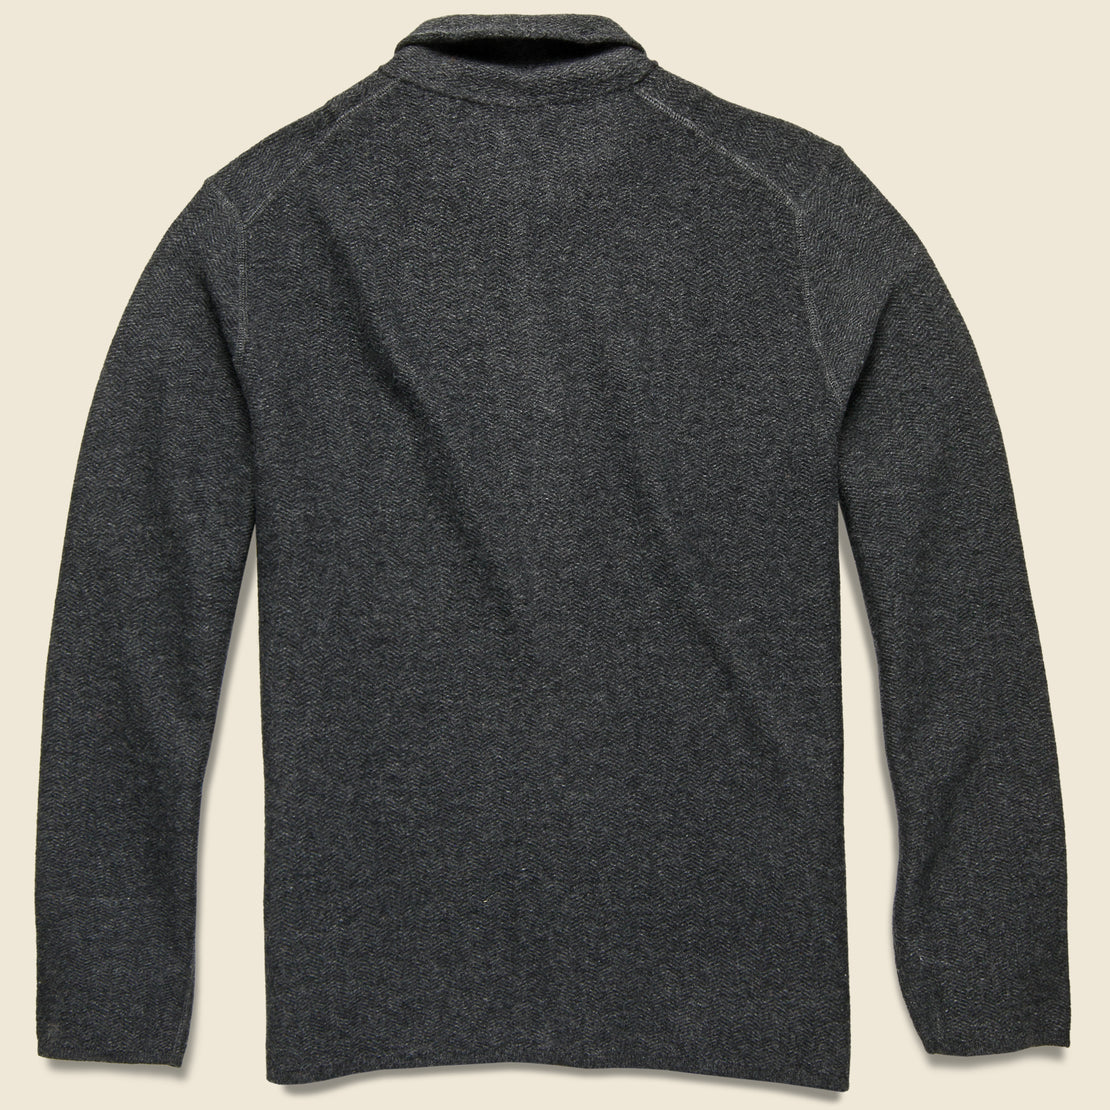 Superfine Merino Jacket - Heather Charcoal - Alex Mill - STAG Provisions - Tops - Sweater